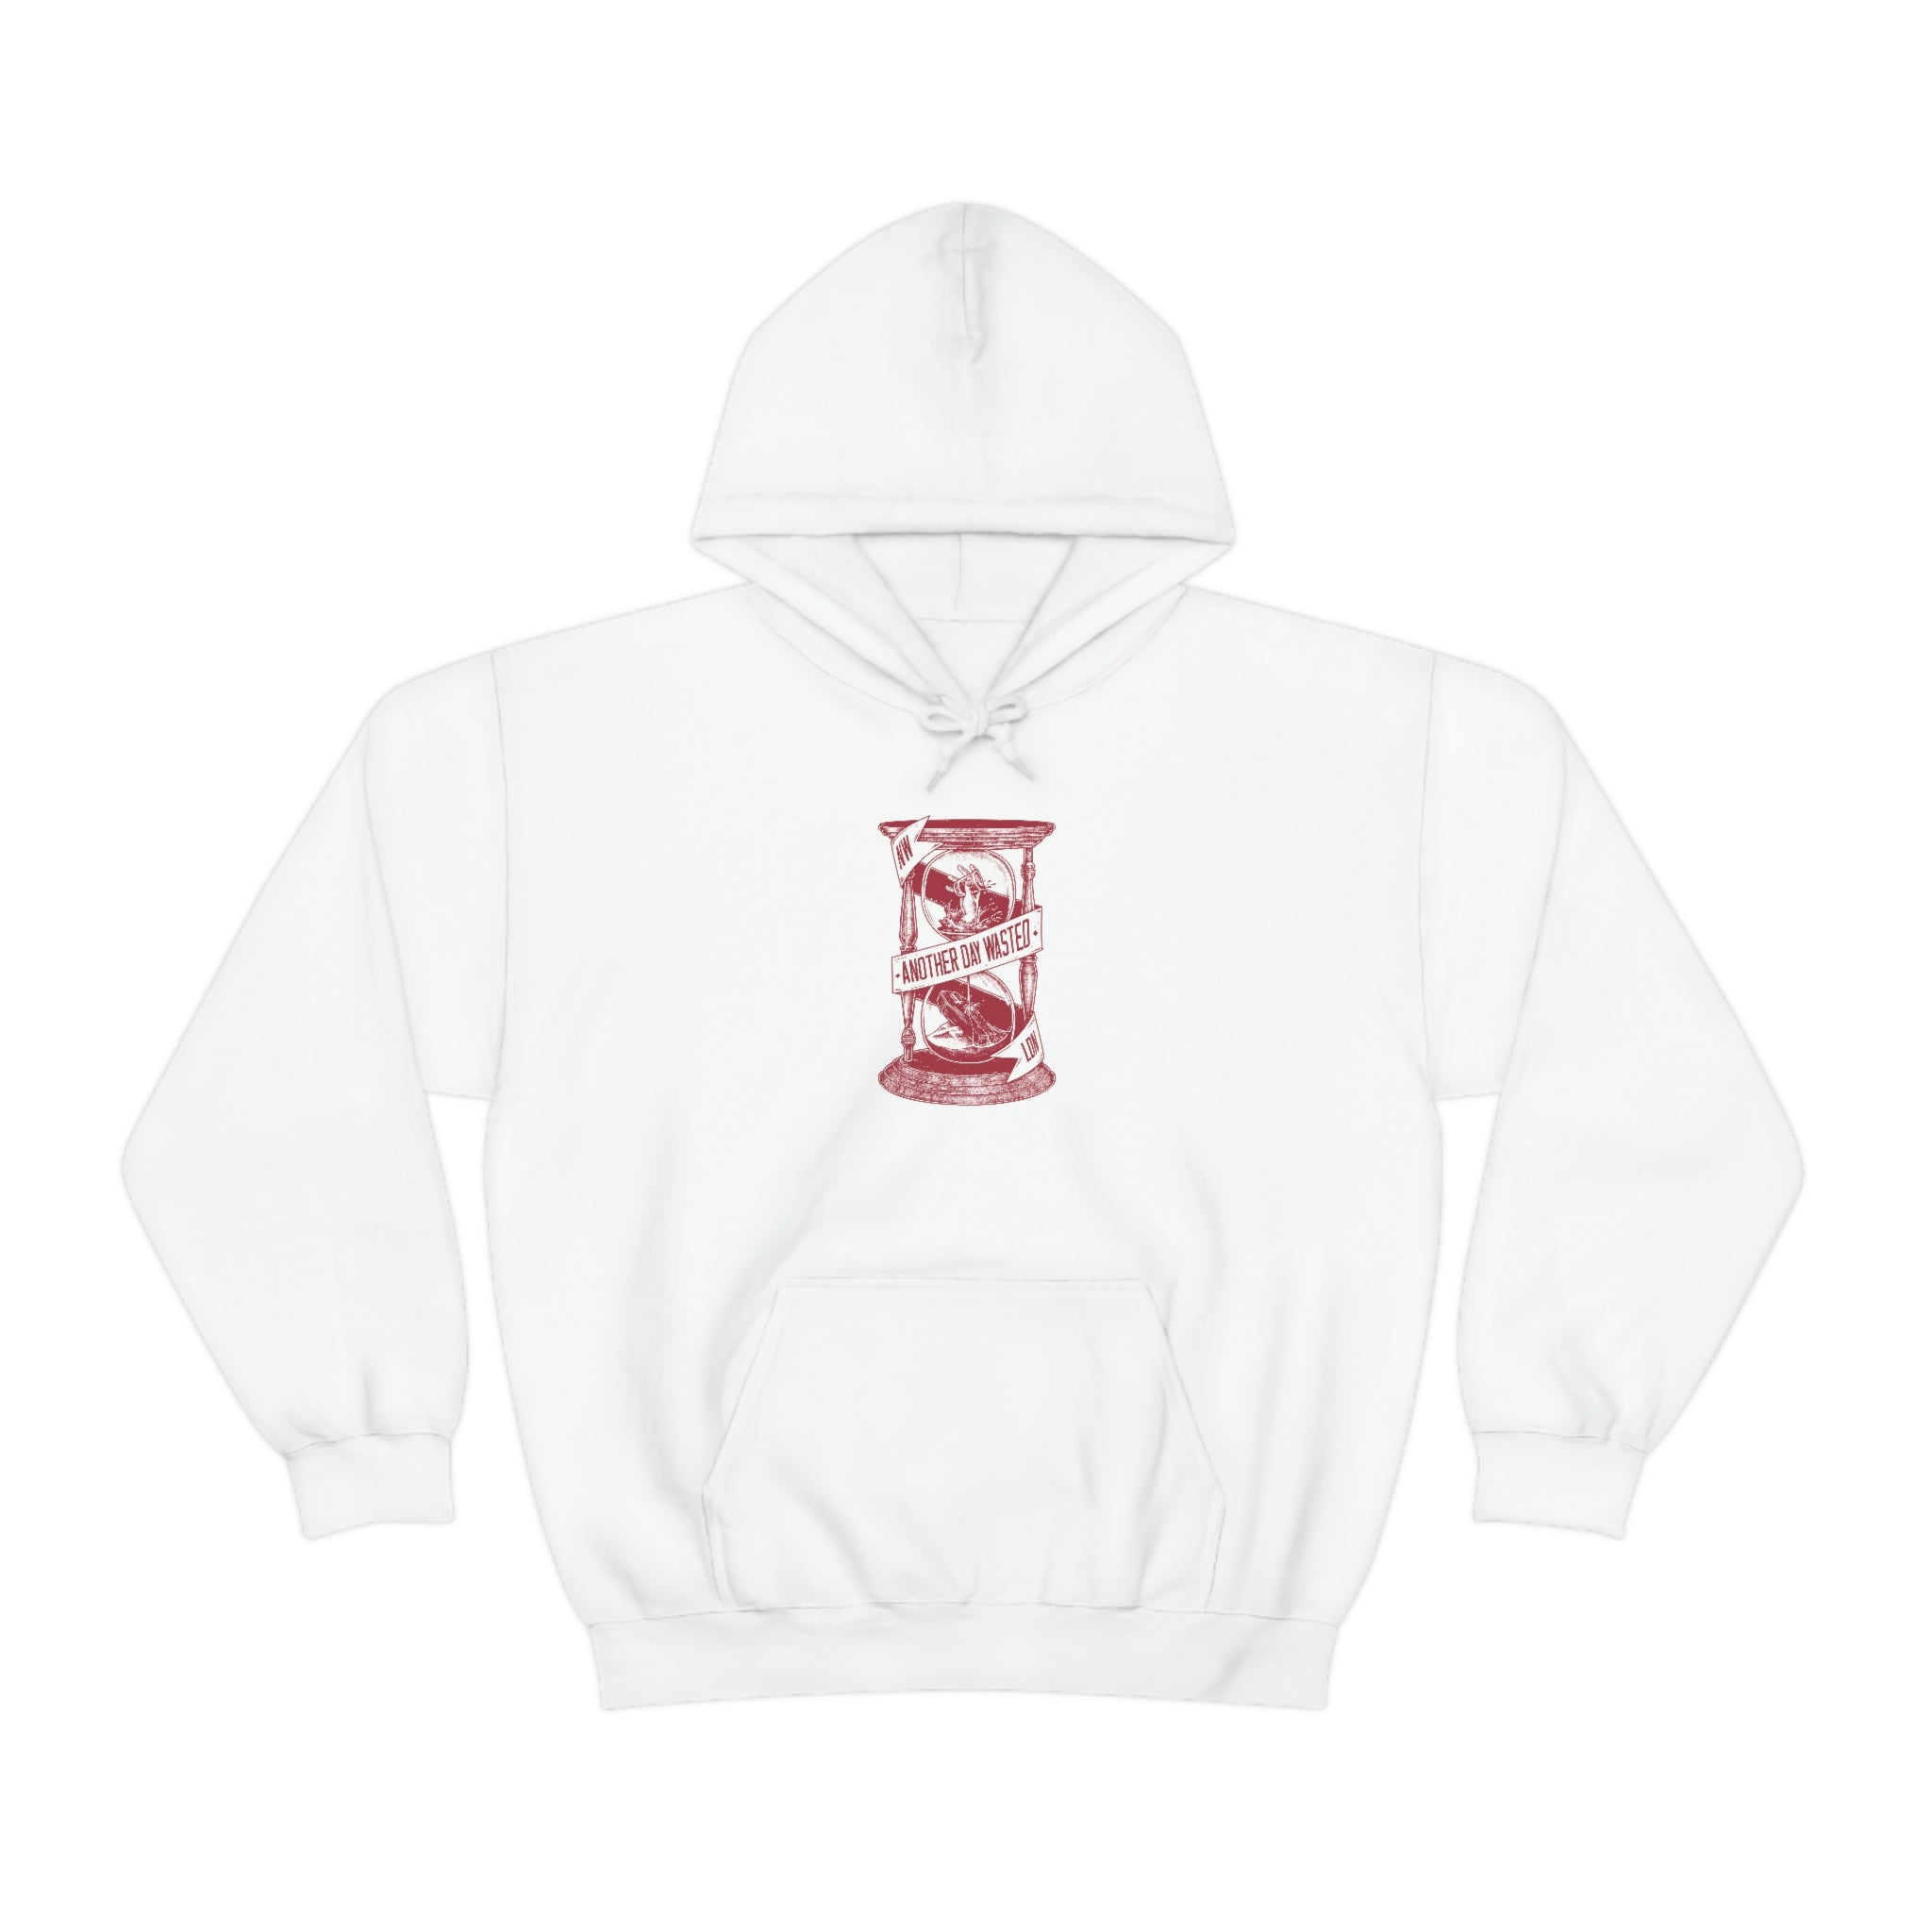 WASTED TIME HOODY